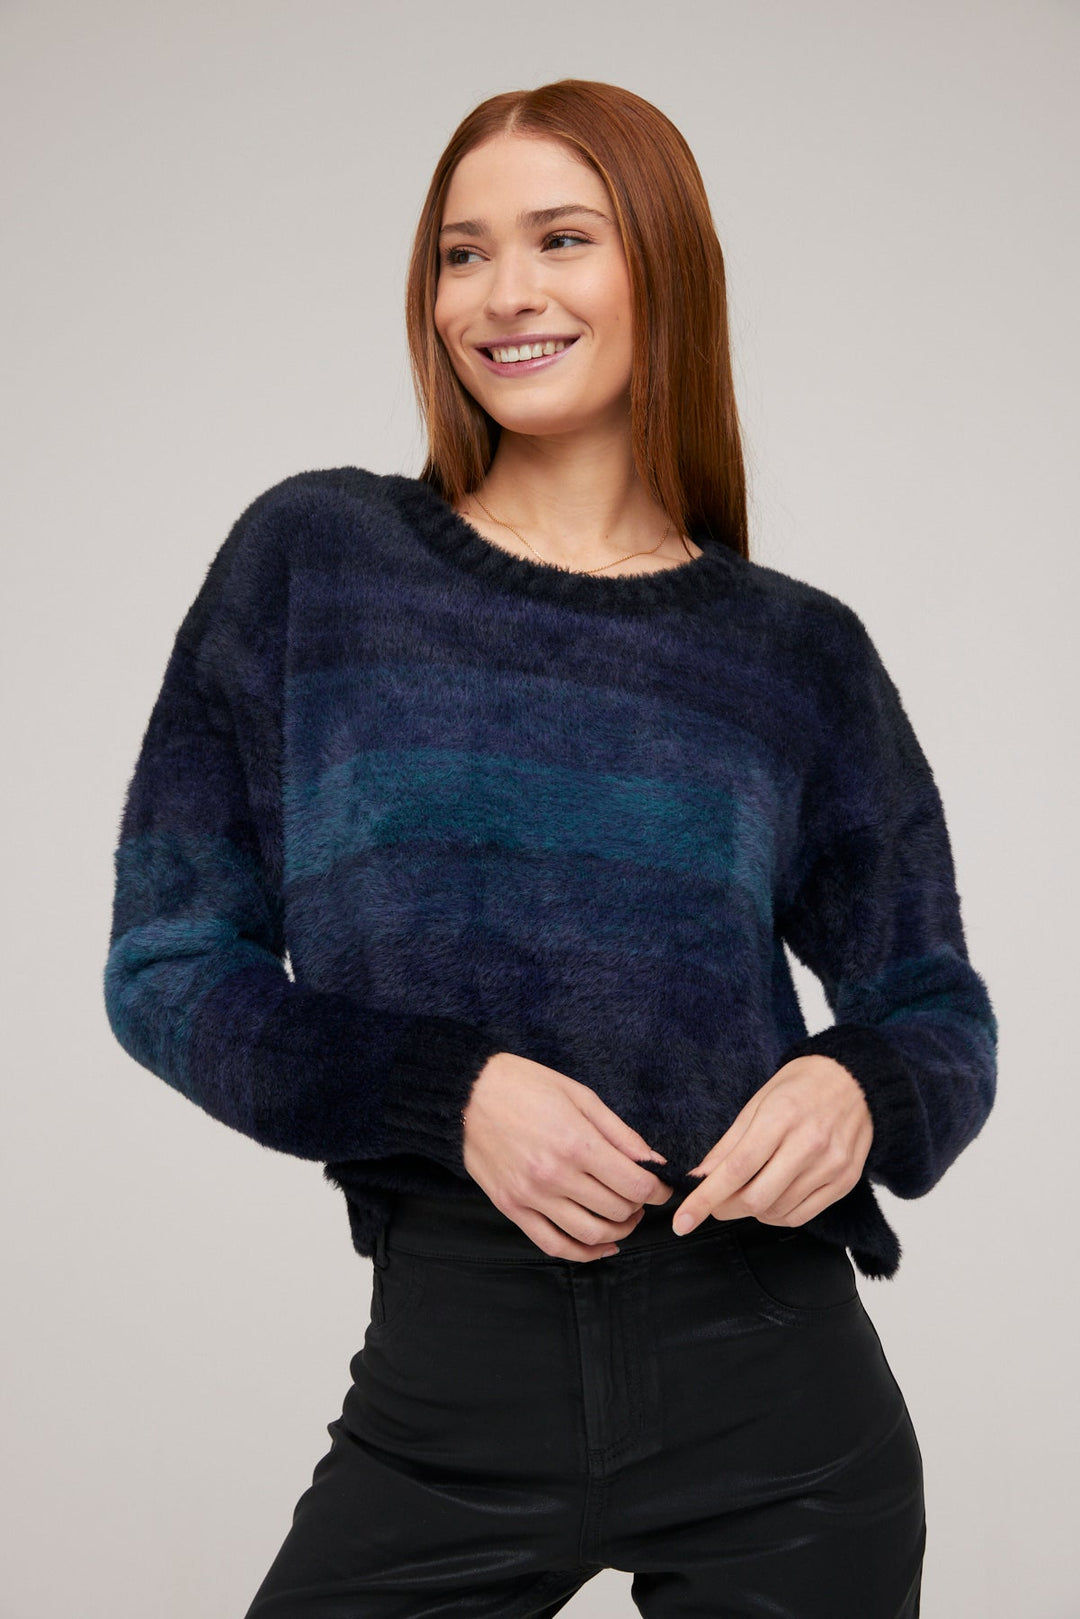 Slouchy Sweater - Midnight Navy Ombre - MIDNIGHT NAVY OMBRE / S